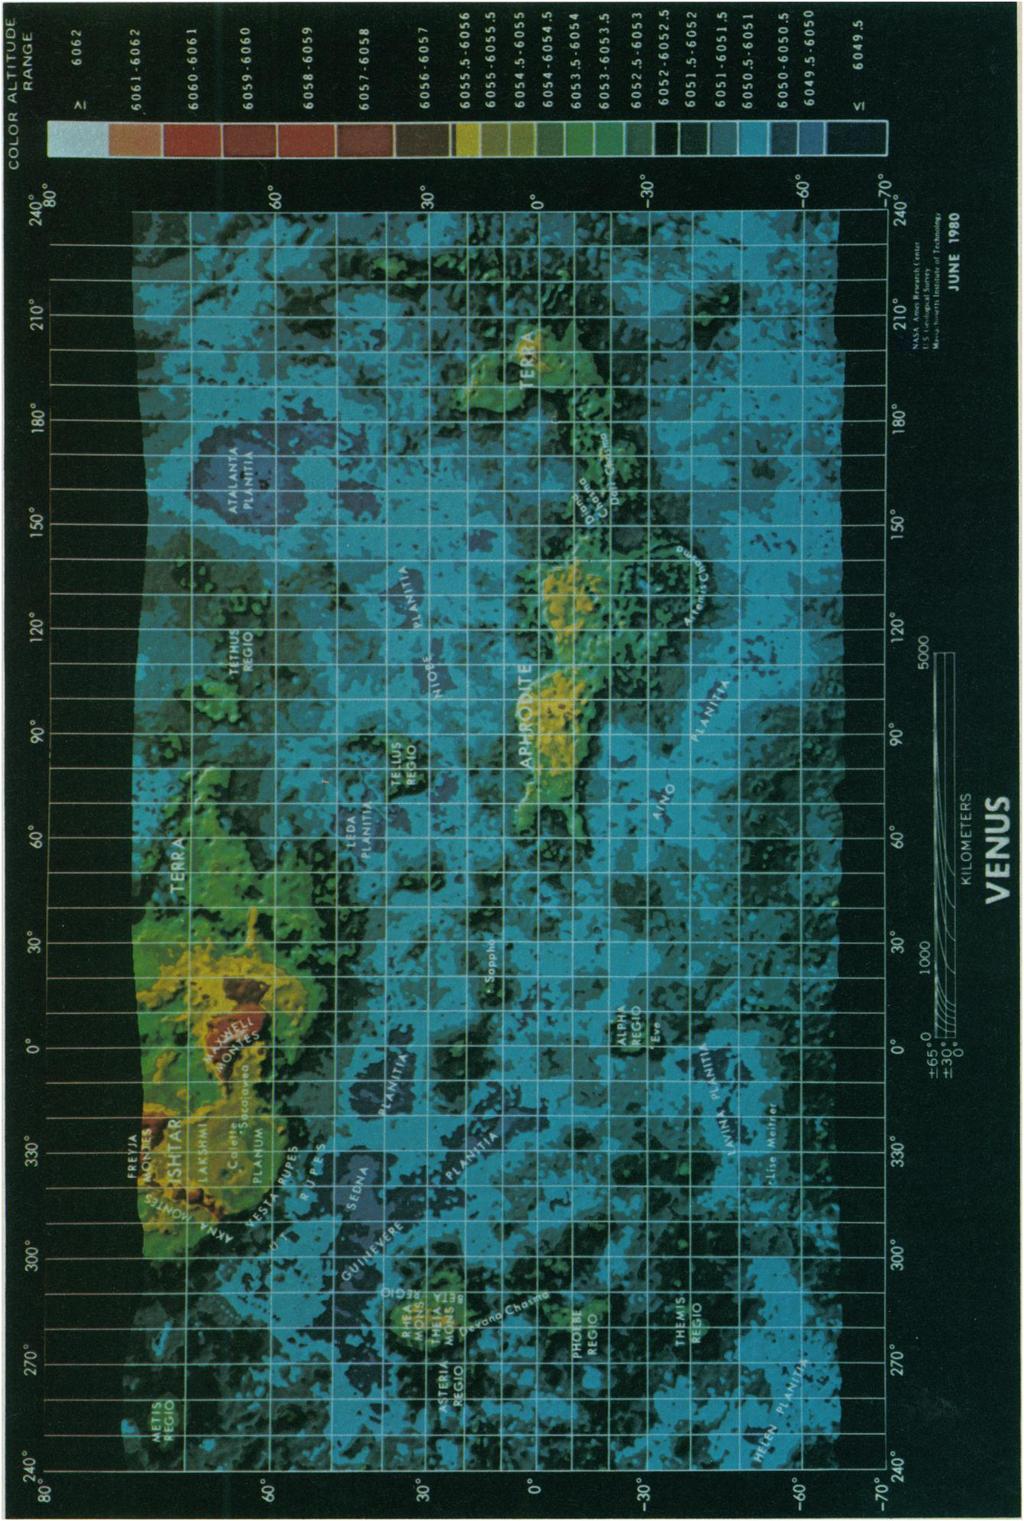 t- 00 Fig. 11. Topography of the surface of Venus (Mercator projection).